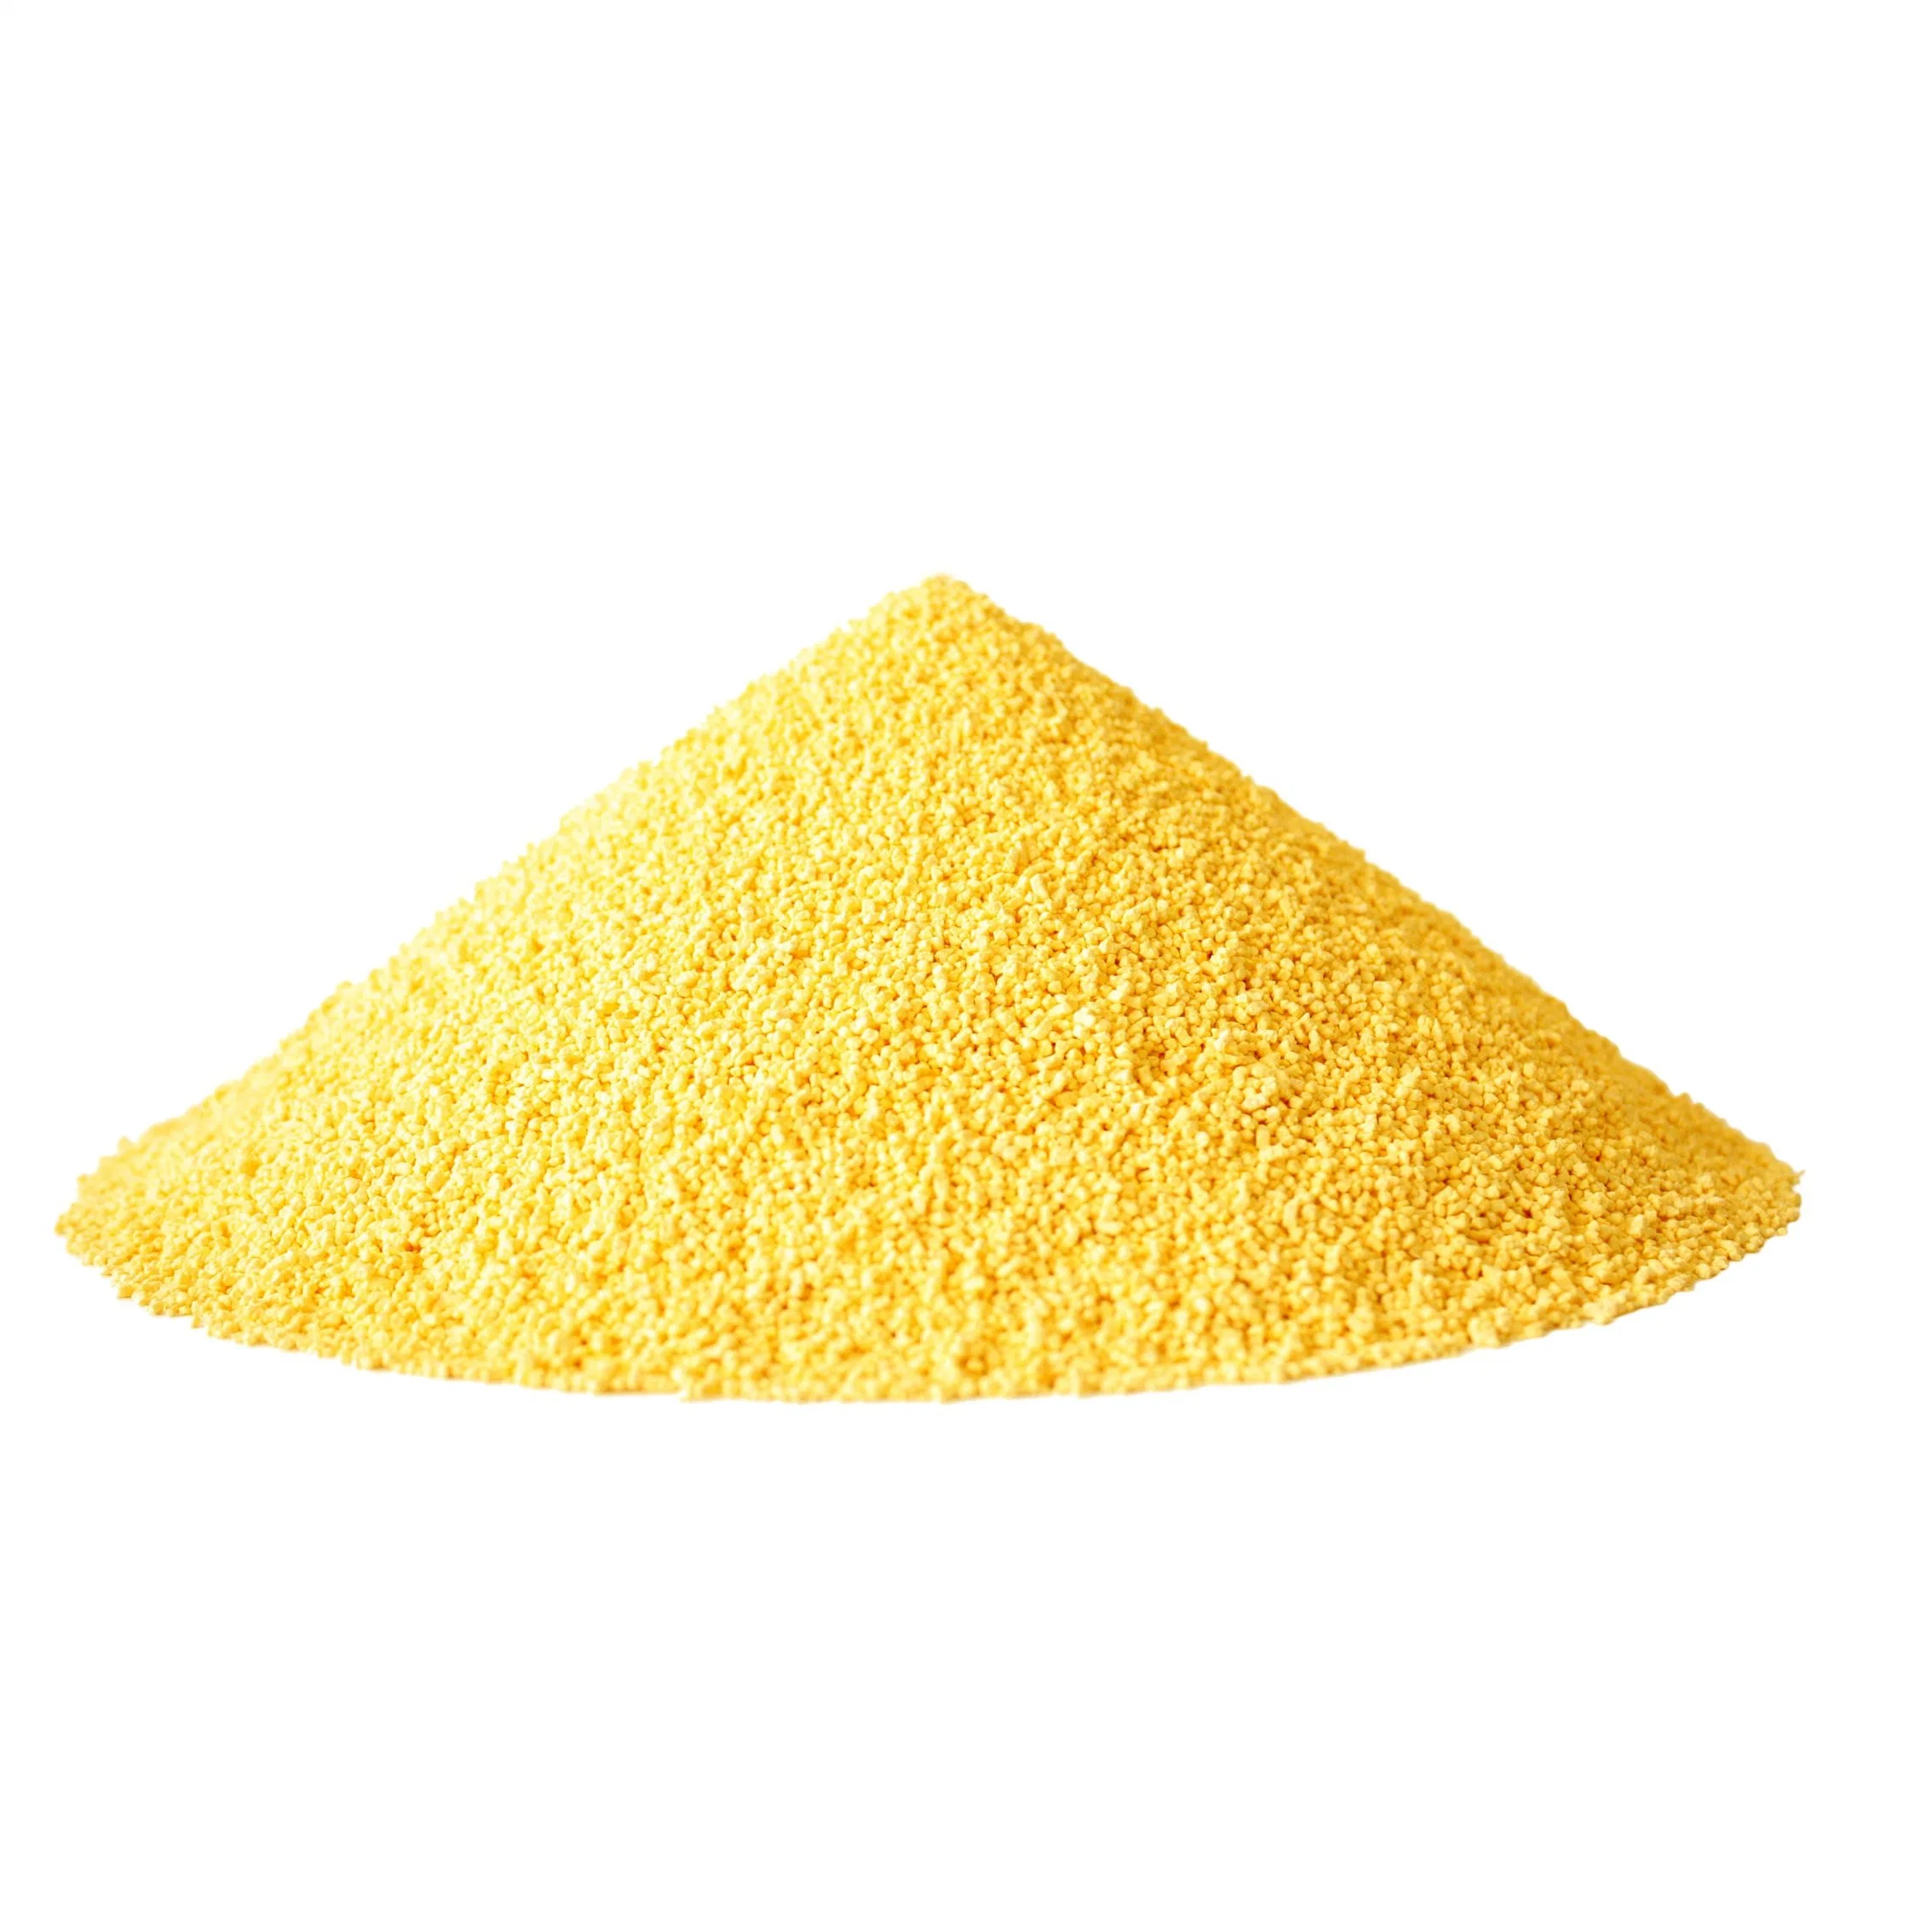 China Supplier Feed Additive Granule for Chicken Weight Gain Powder Promote The Animal Growth